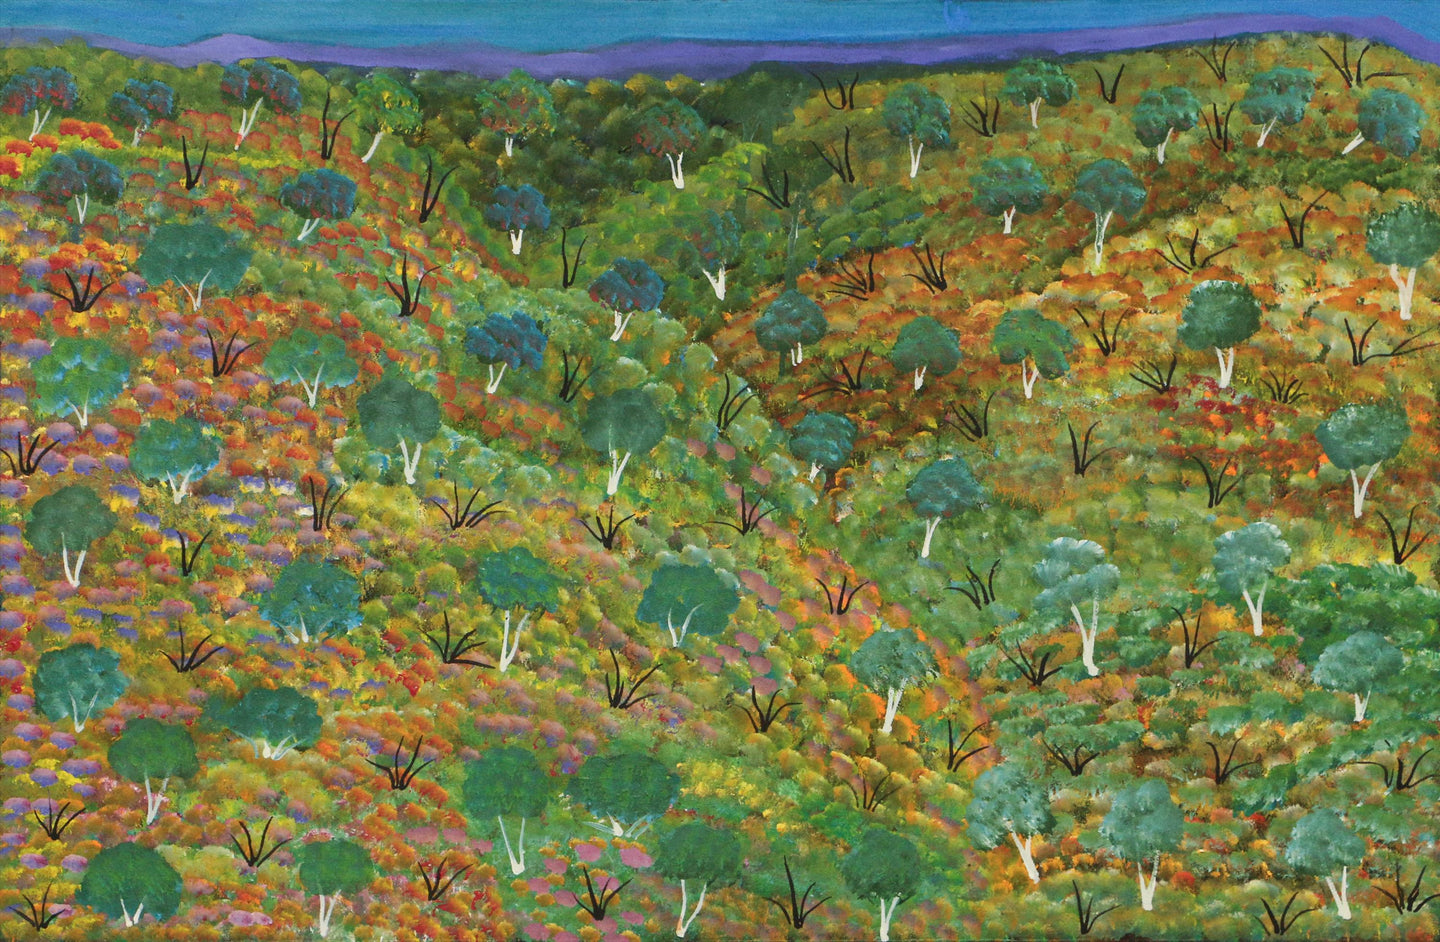 My Country, 61x91cm